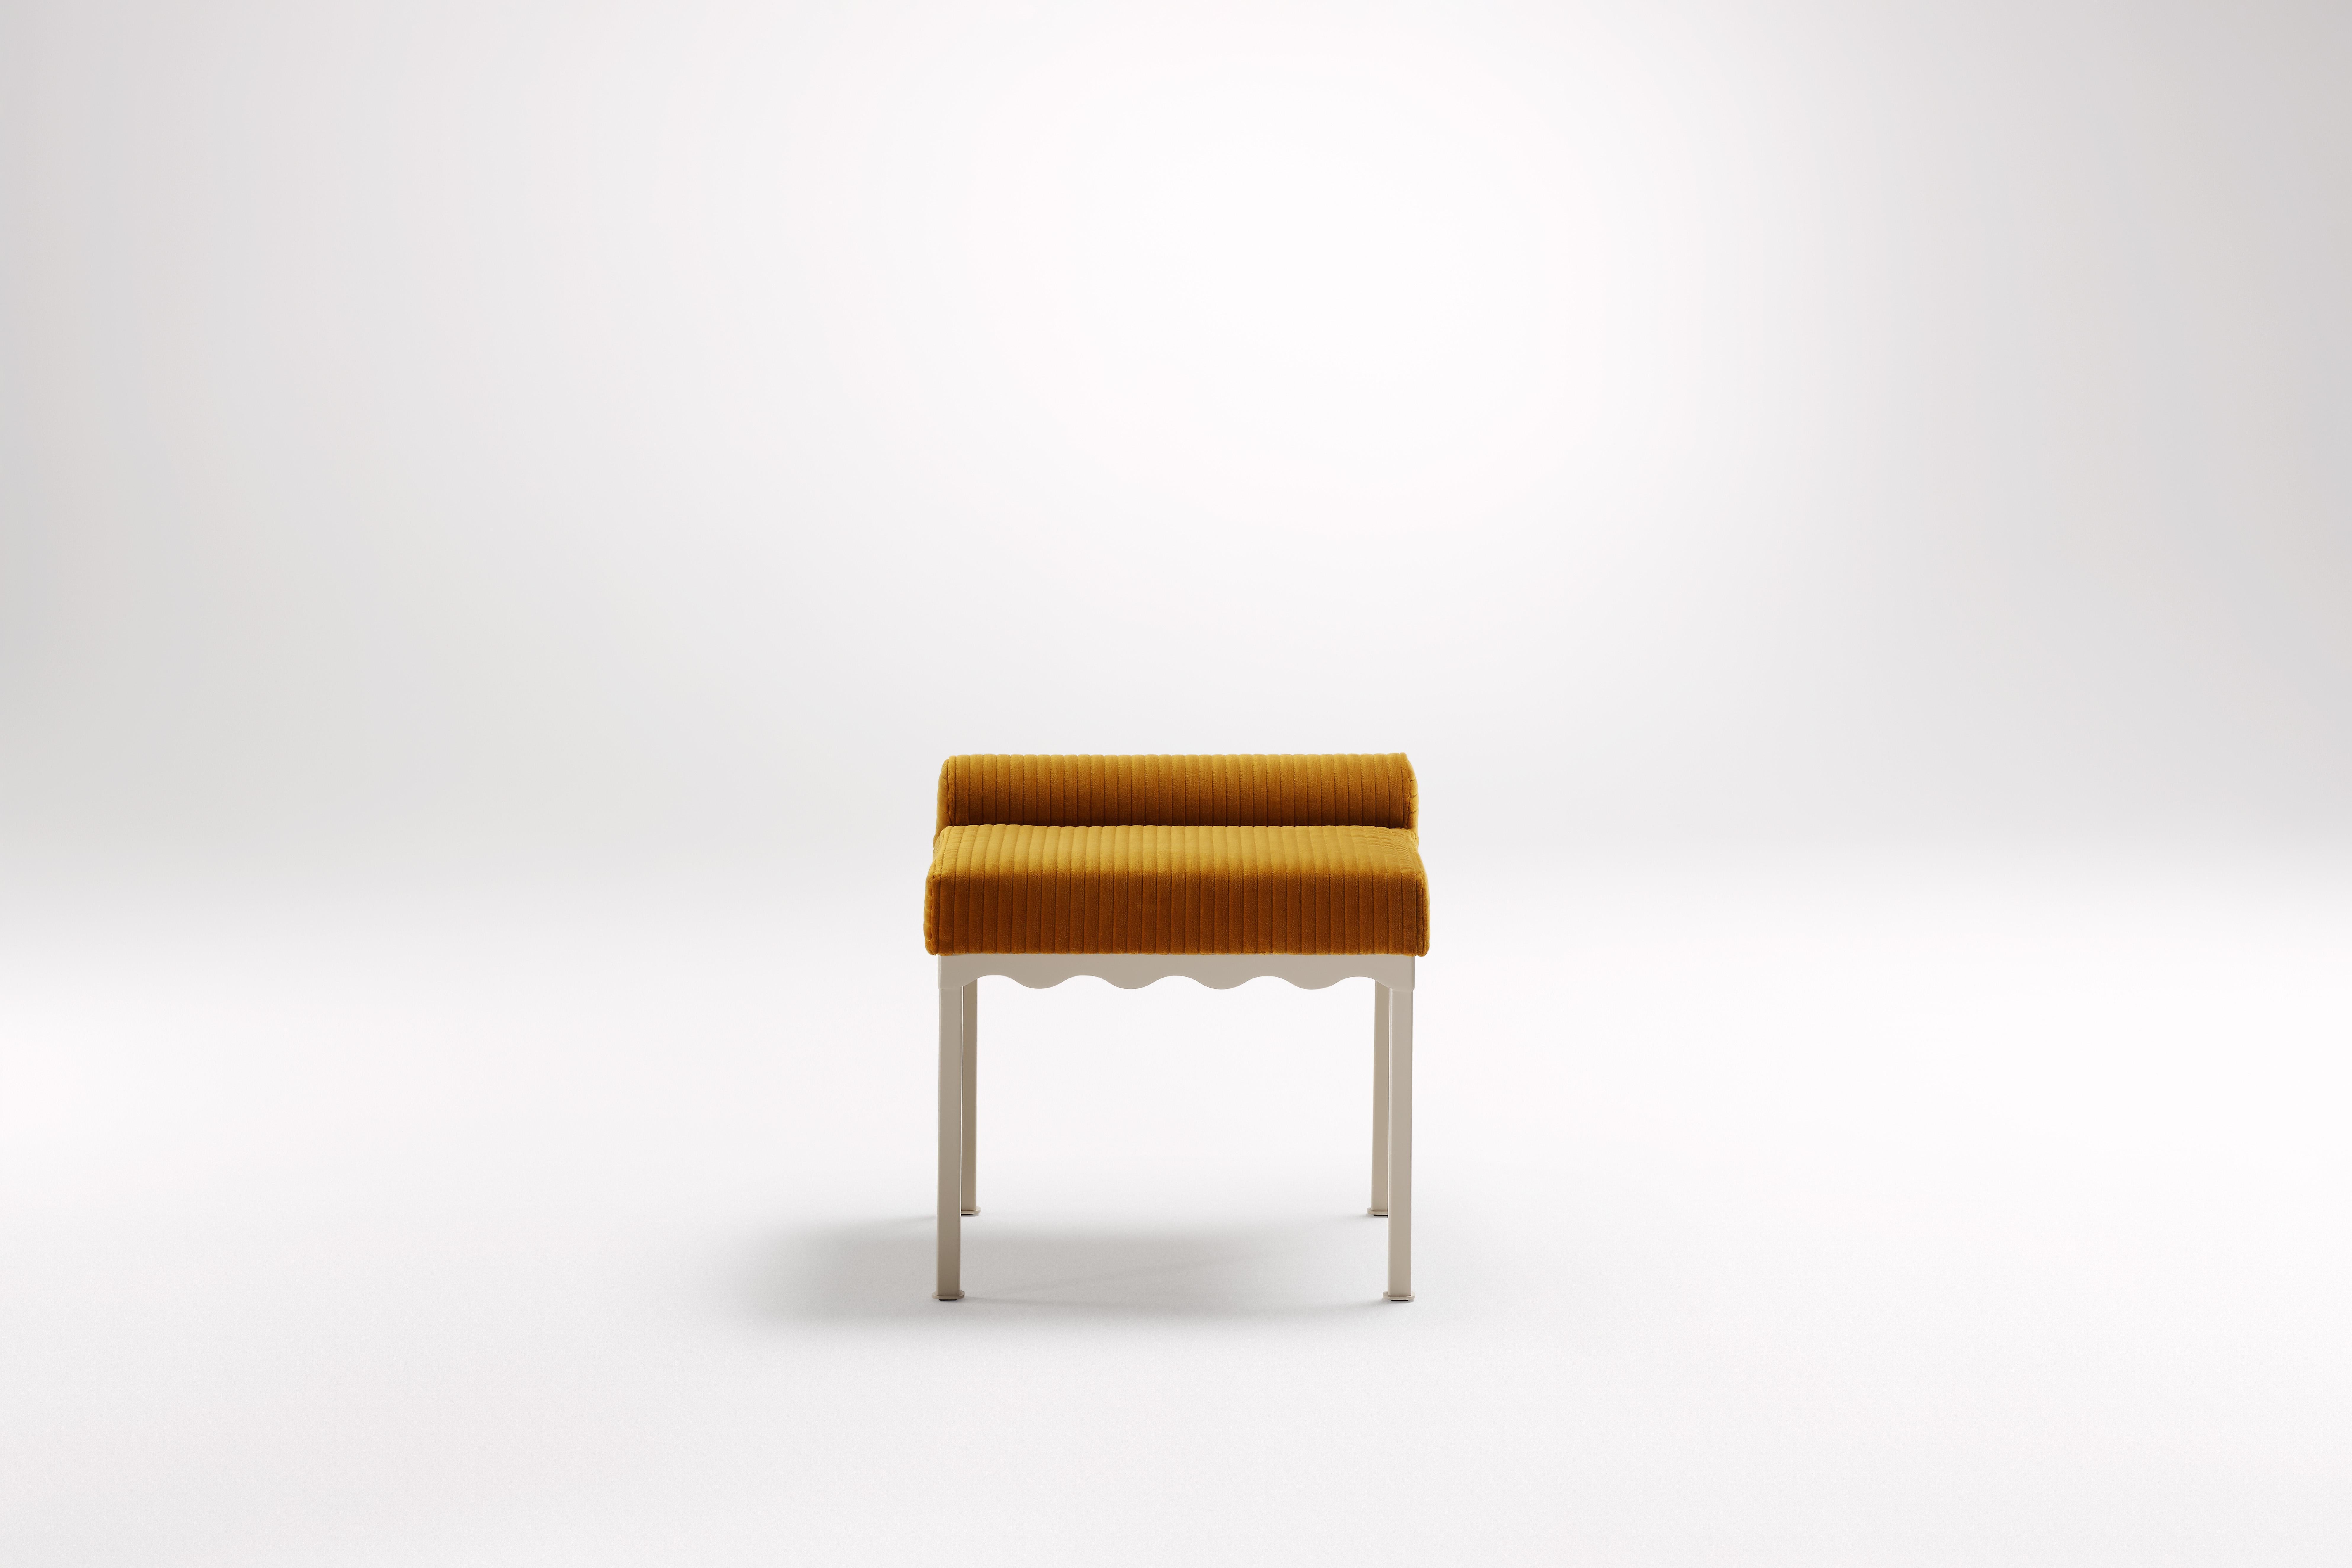 Mikado Bellini 540 Bench by Coco Flip
Dimensions: D 54 x W 54 x H 52.5 cm
Materials: Timber / Upholstered tops, Powder-coated steel frame. 
Weight: 12 kg
Frame Finishes: Textura Paperbark.

Coco Flip is a Melbourne based furniture and lighting